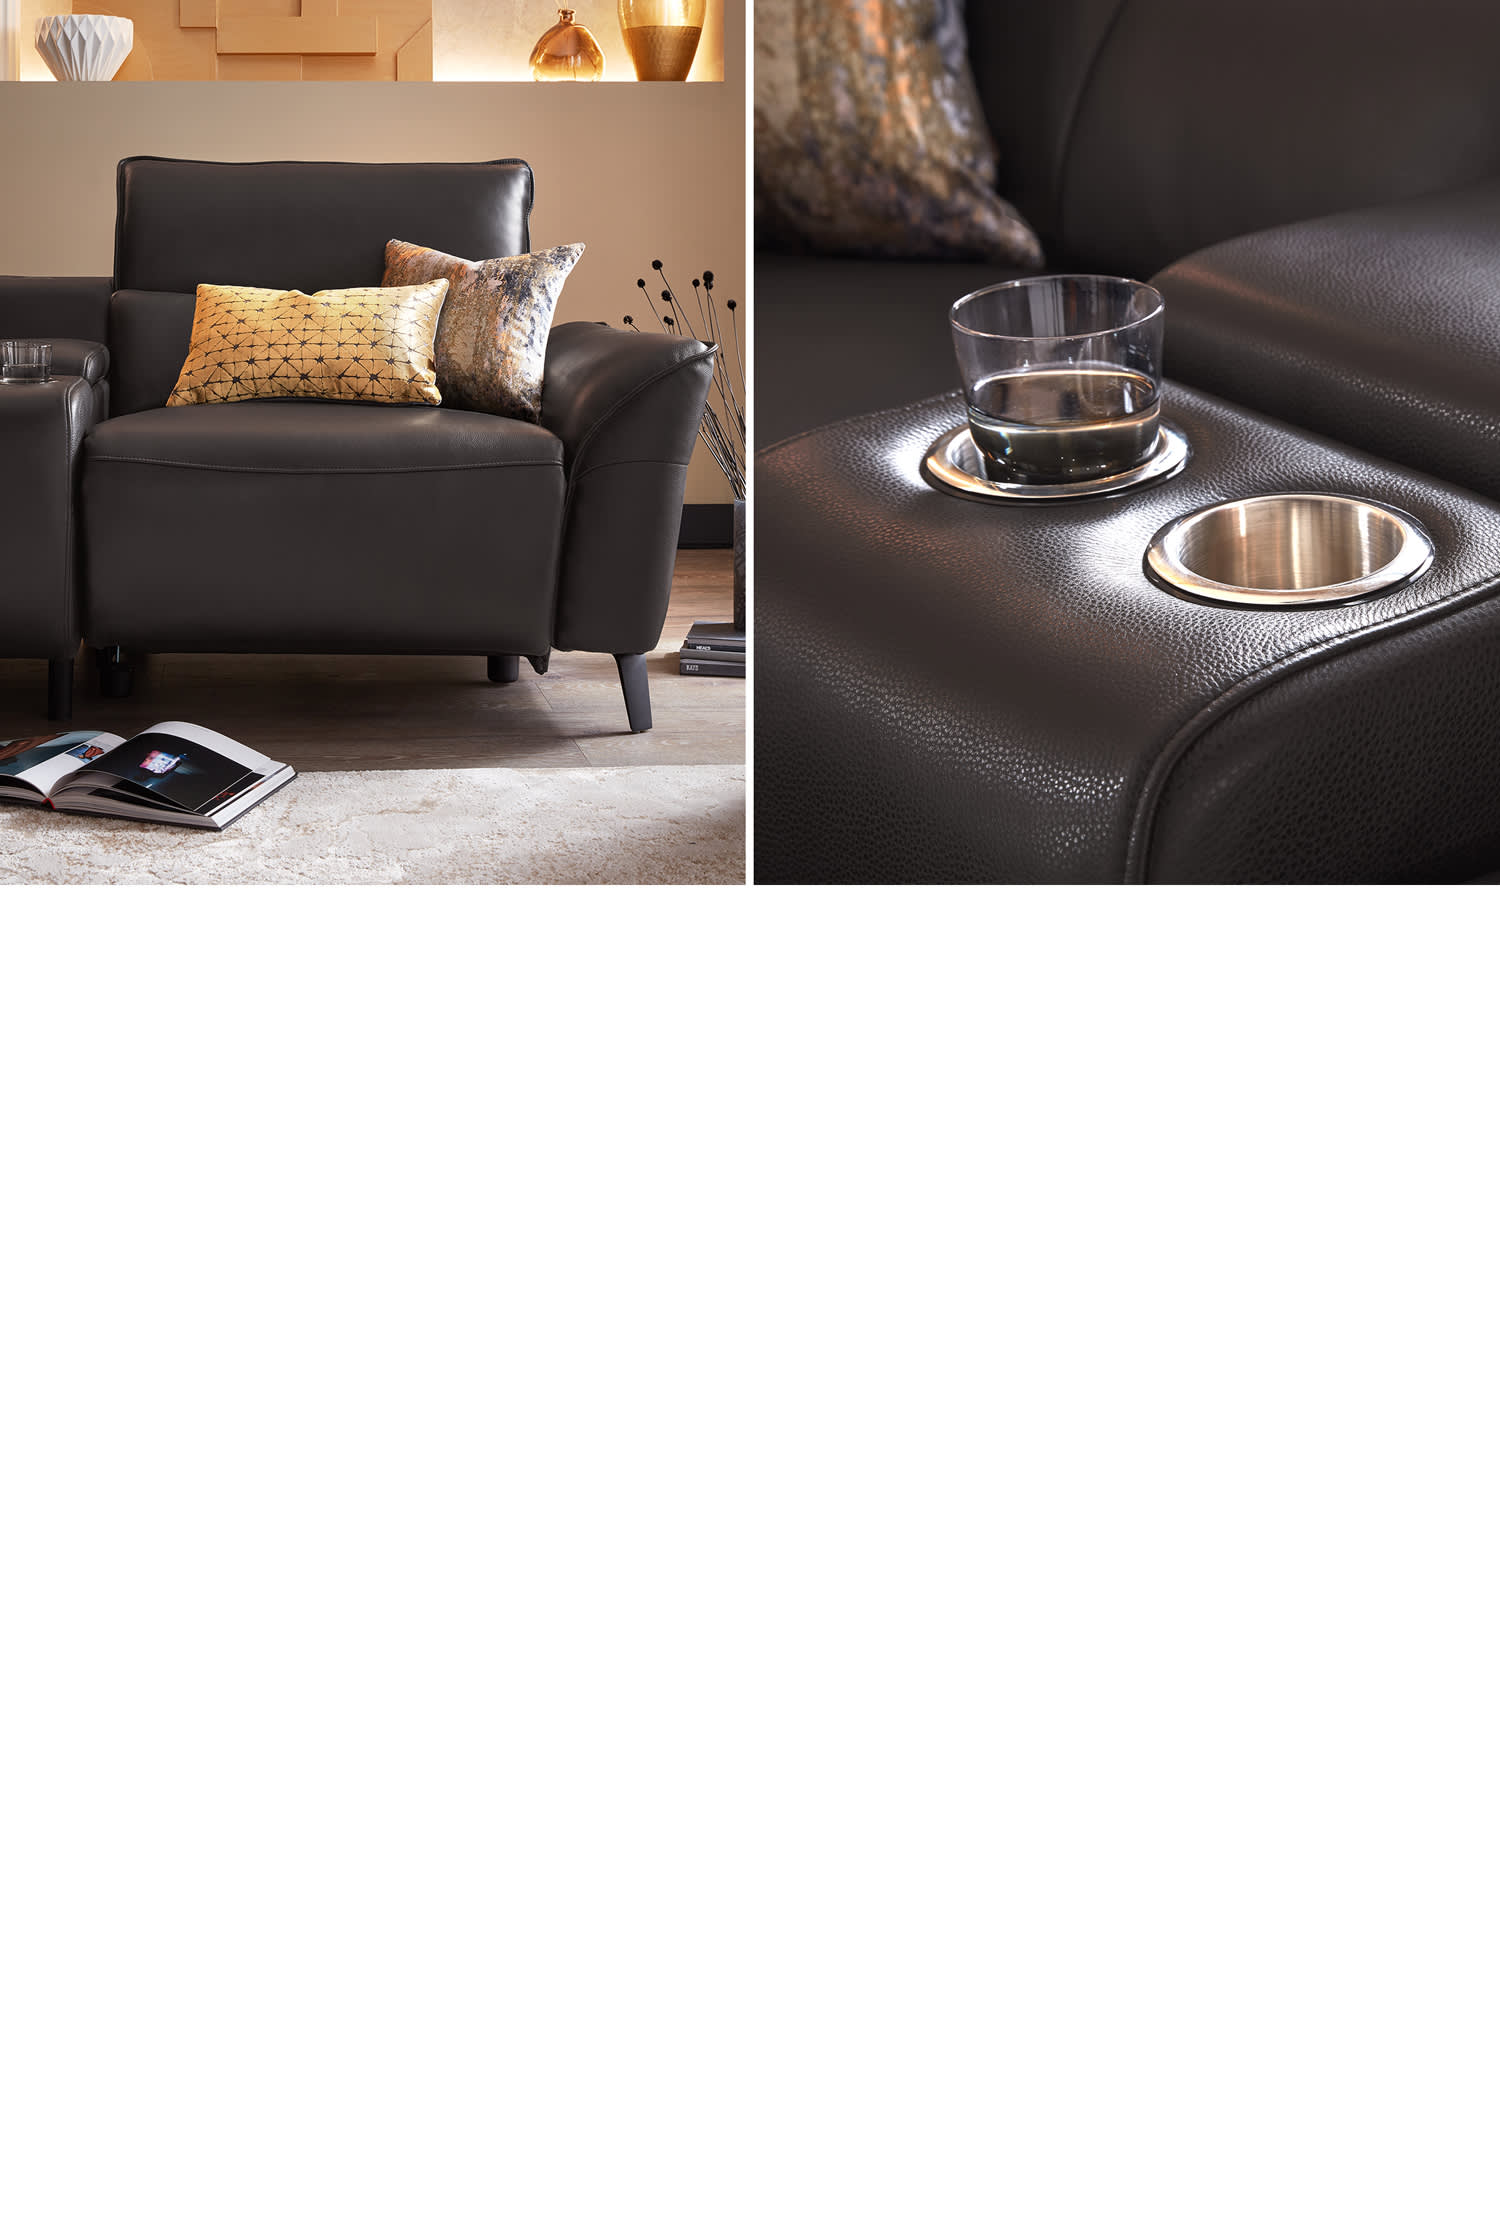 Sofas with Cooling Cup Holders: A New Level of Luxury!